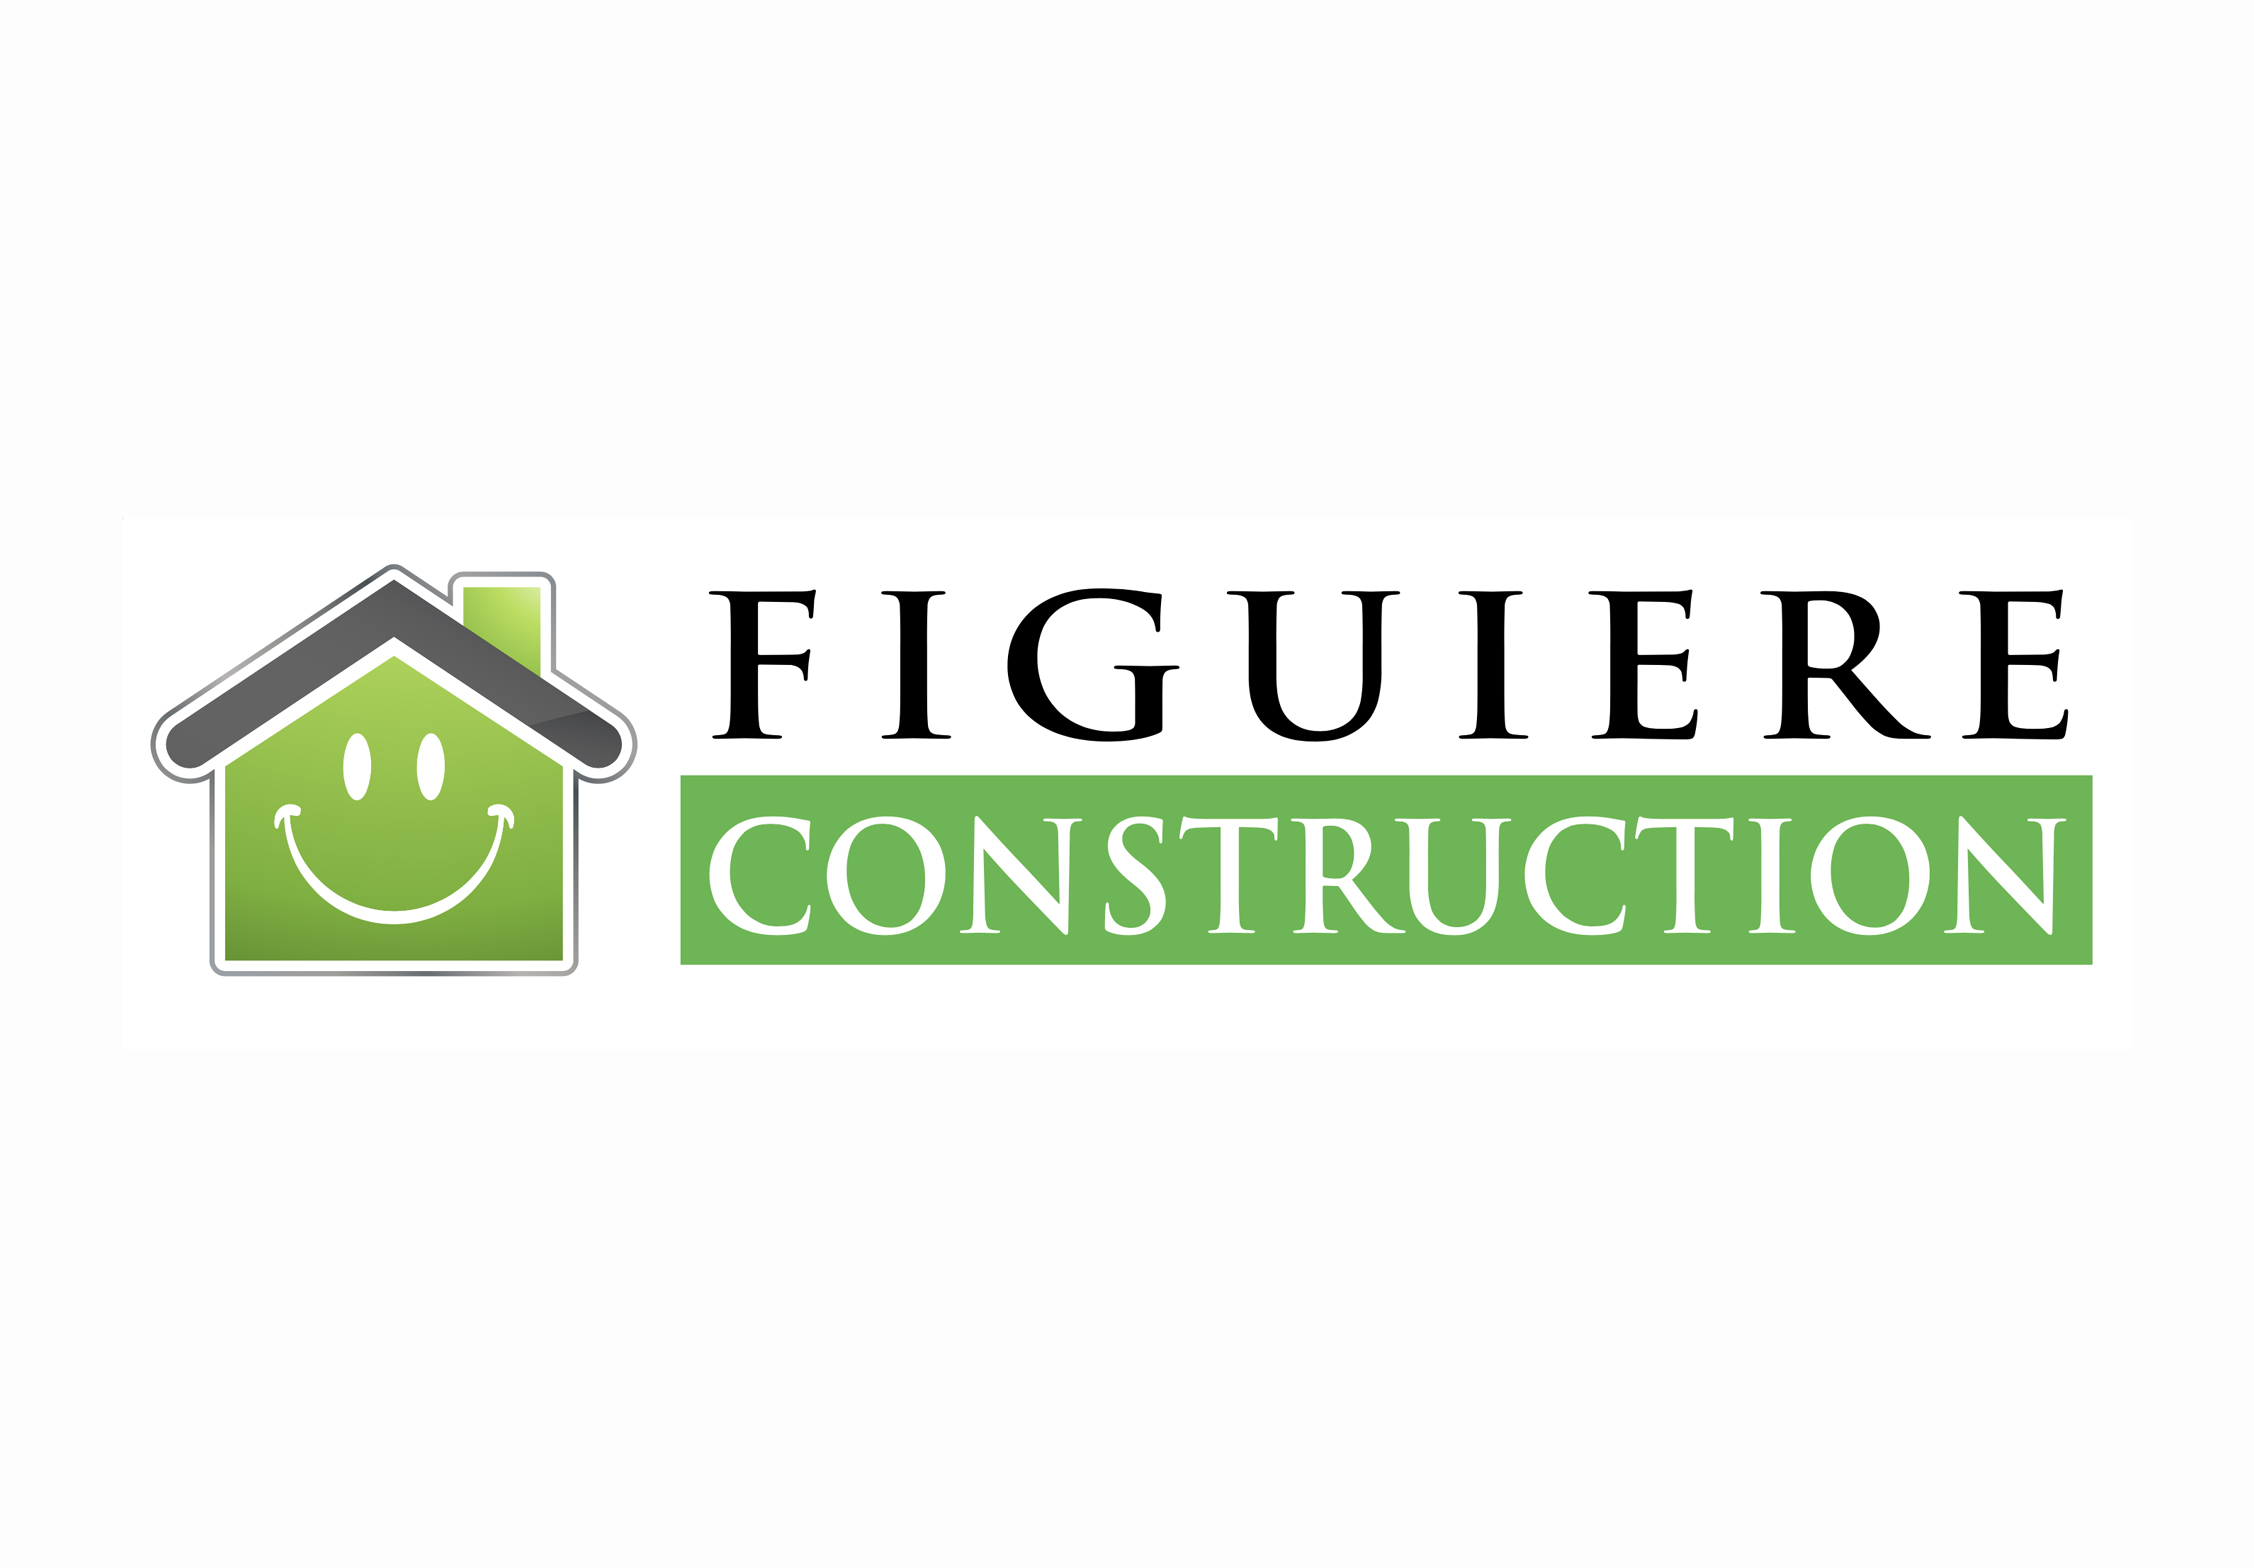 logotheque figuiere construction